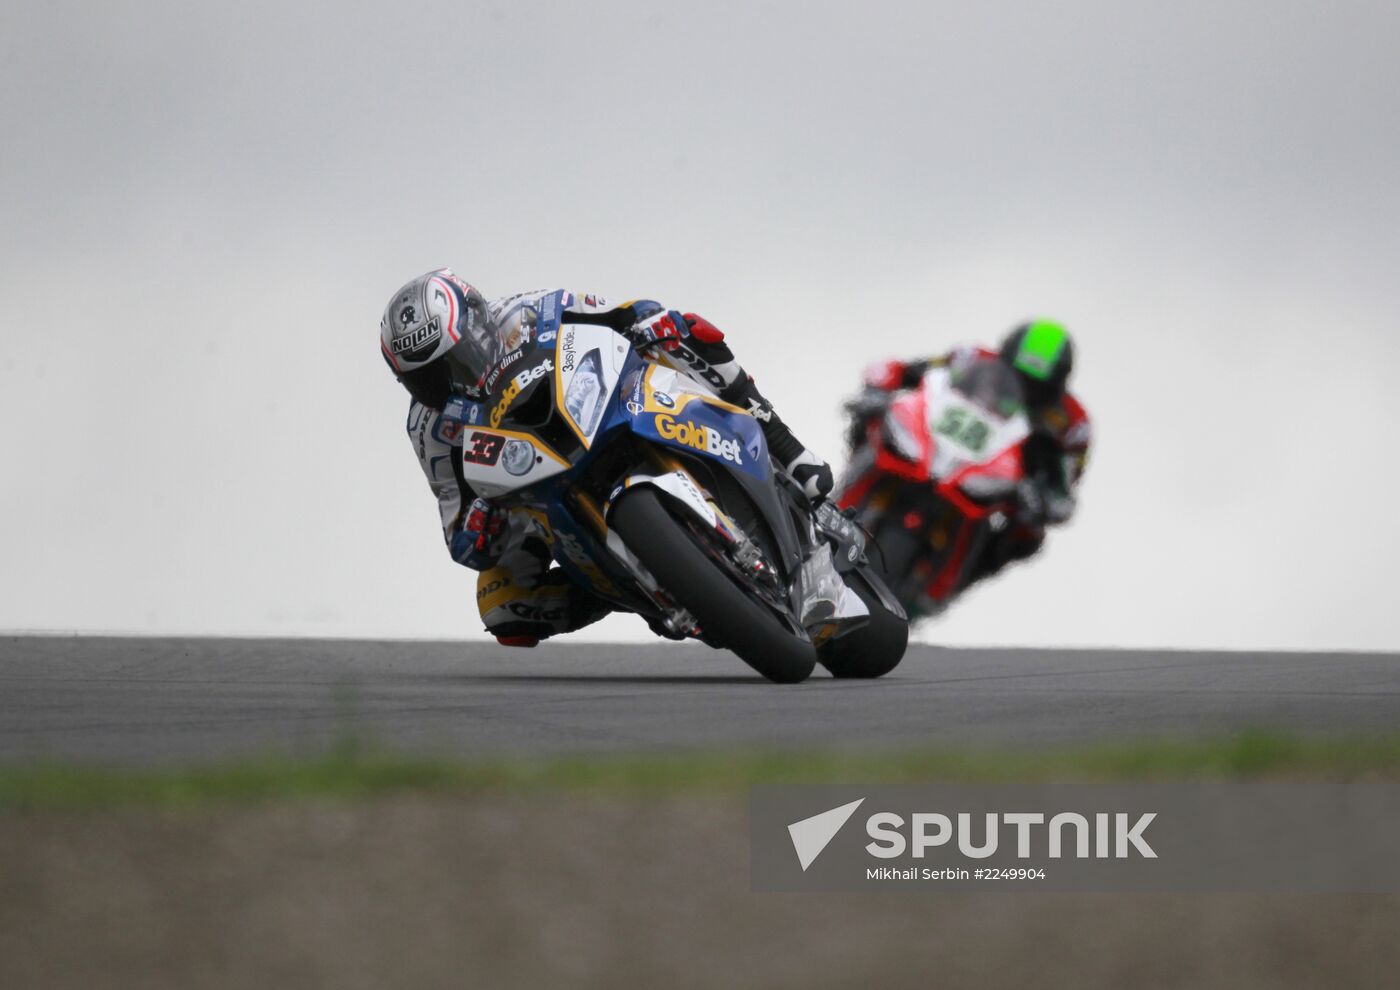 World Supersport Championship race at Moscow Raceway